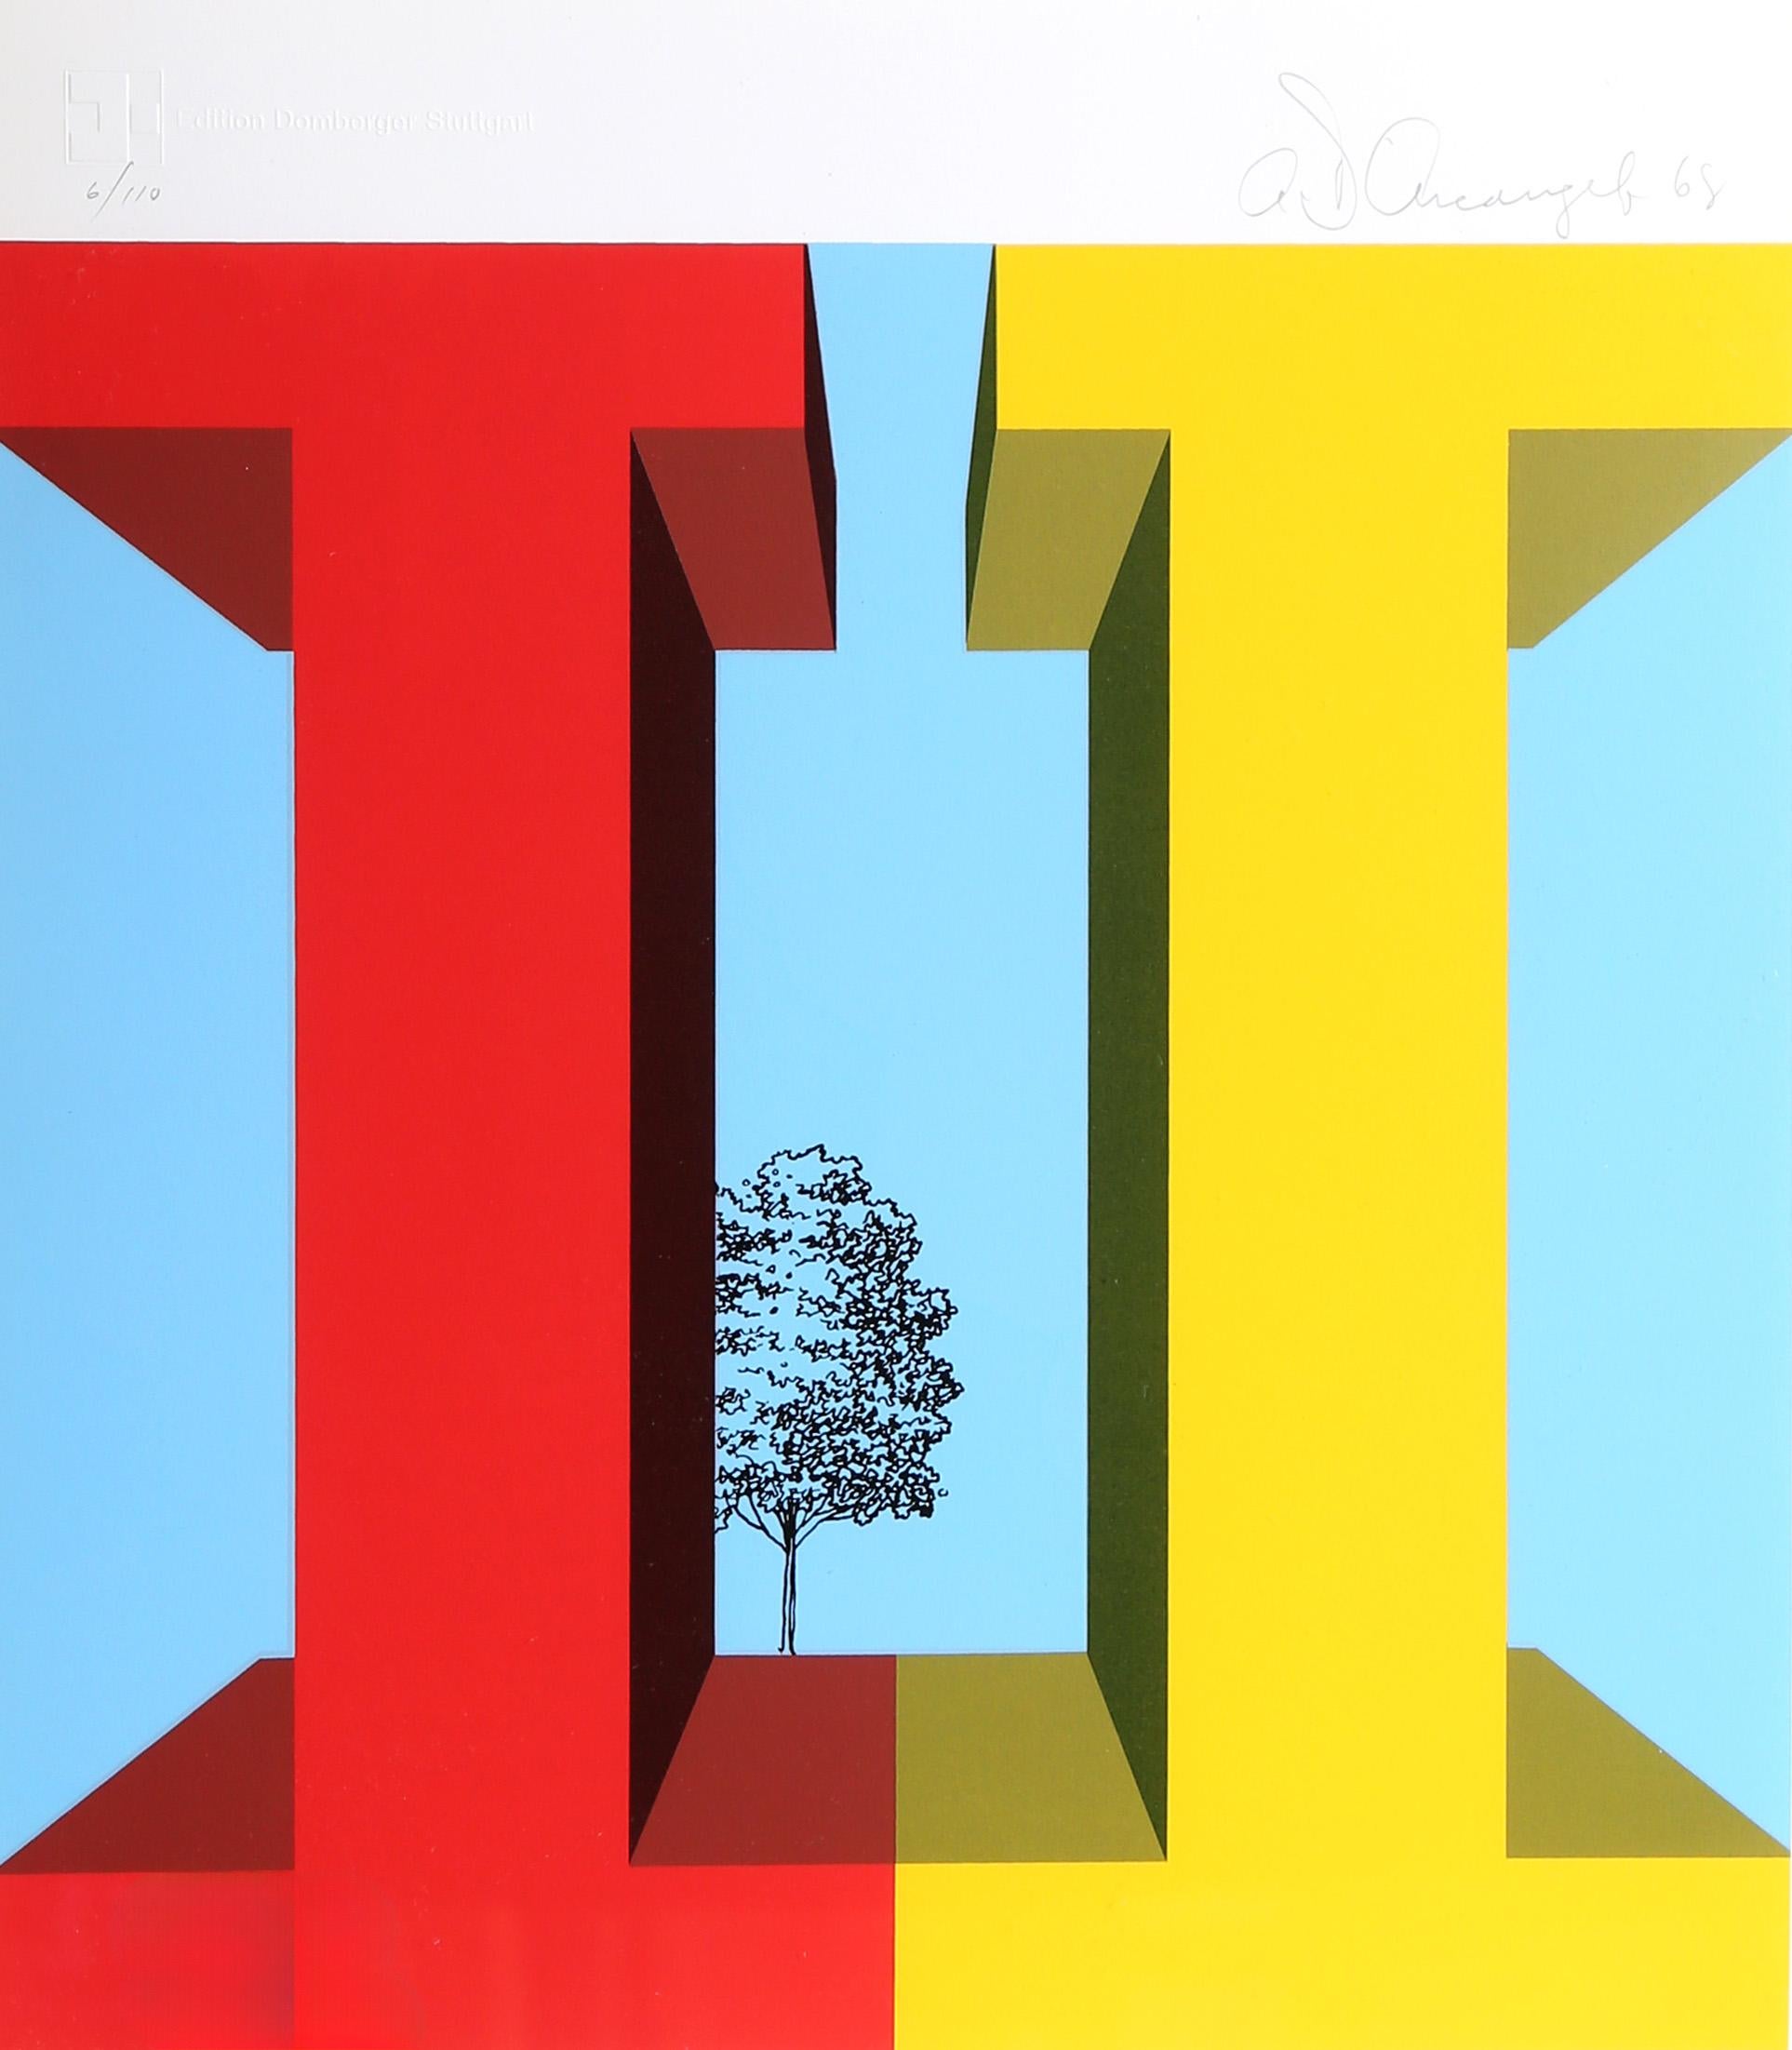 Artist: Allan D'Arcangelo, American (1930 - 1998)
Title: June
Year: 1969
Medium: Silkscreen, signed and numbered in pencil
Edition: 6/100
Size: 14 x 12 in. (35.56 x 30.48 cm)
Frame: 20 x 18 inches

Printed and published by Domberger, Germany